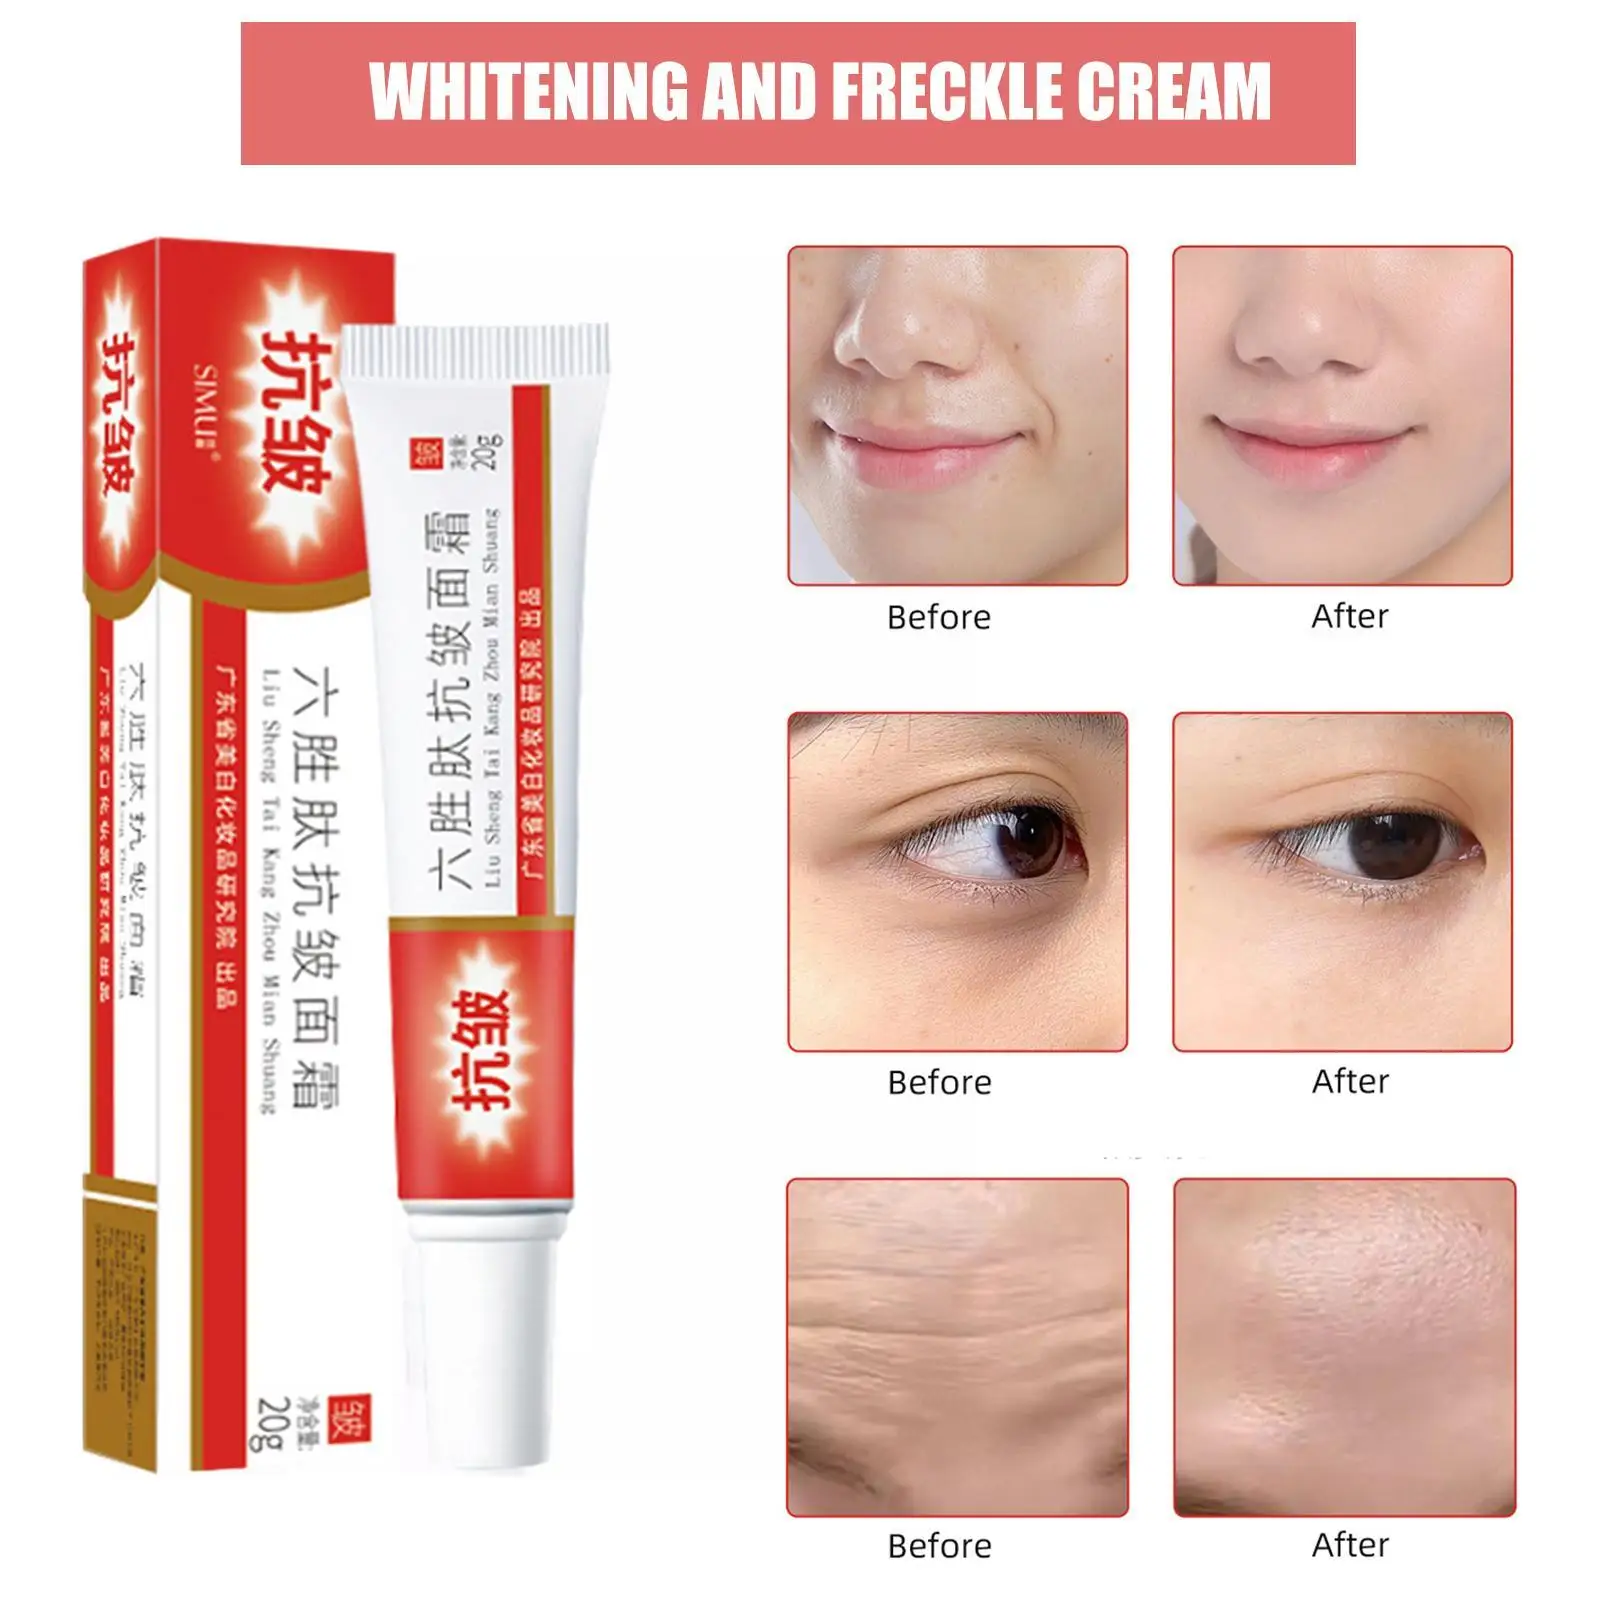 

Six Peptide Lifting Firming Cream Remove Wrinkle Anti-Aging Fade Fine Lines Face Product Moisturizing Brighten Skin Beauty Care